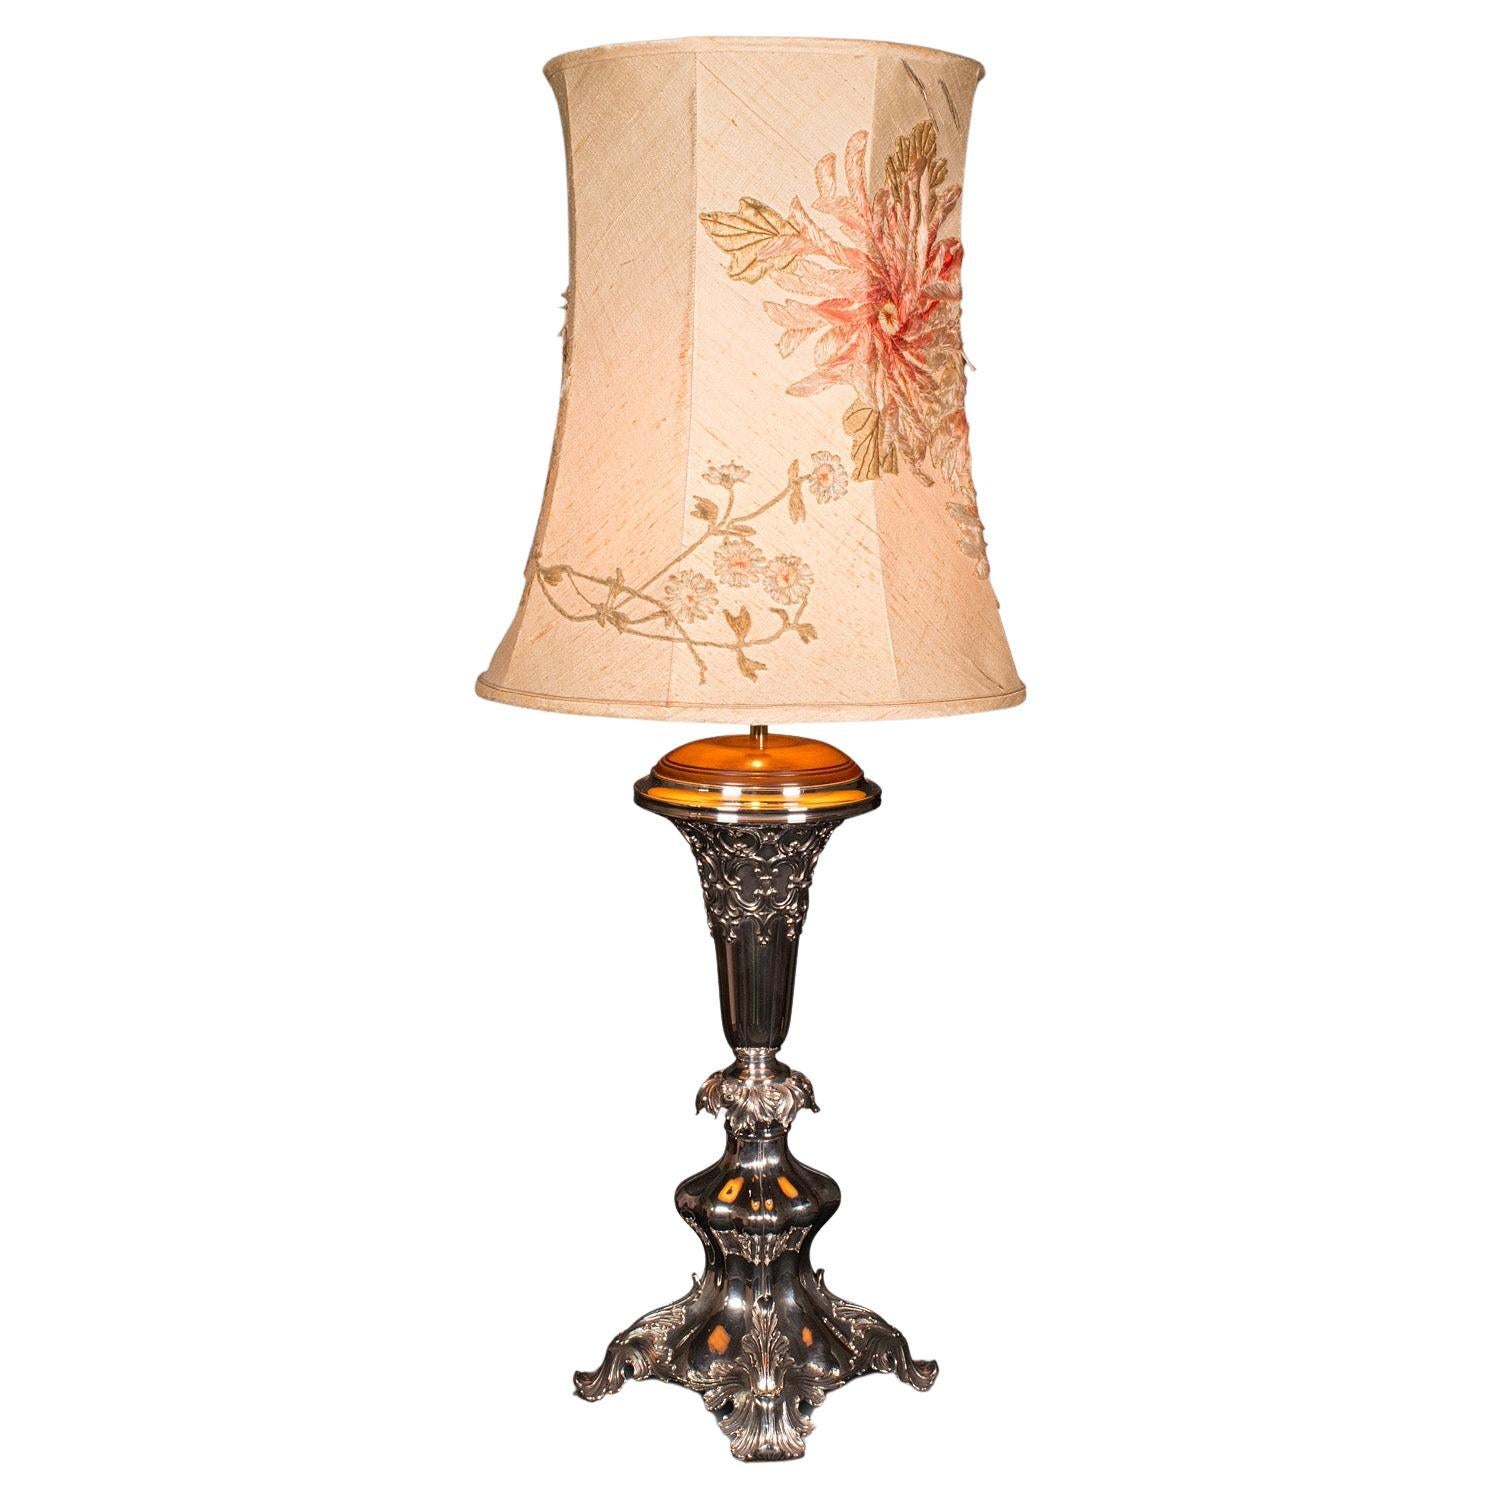 Large Antique Table Lamp, English Silver Plate, Walnut, Light, Victorian, C.1900 For Sale